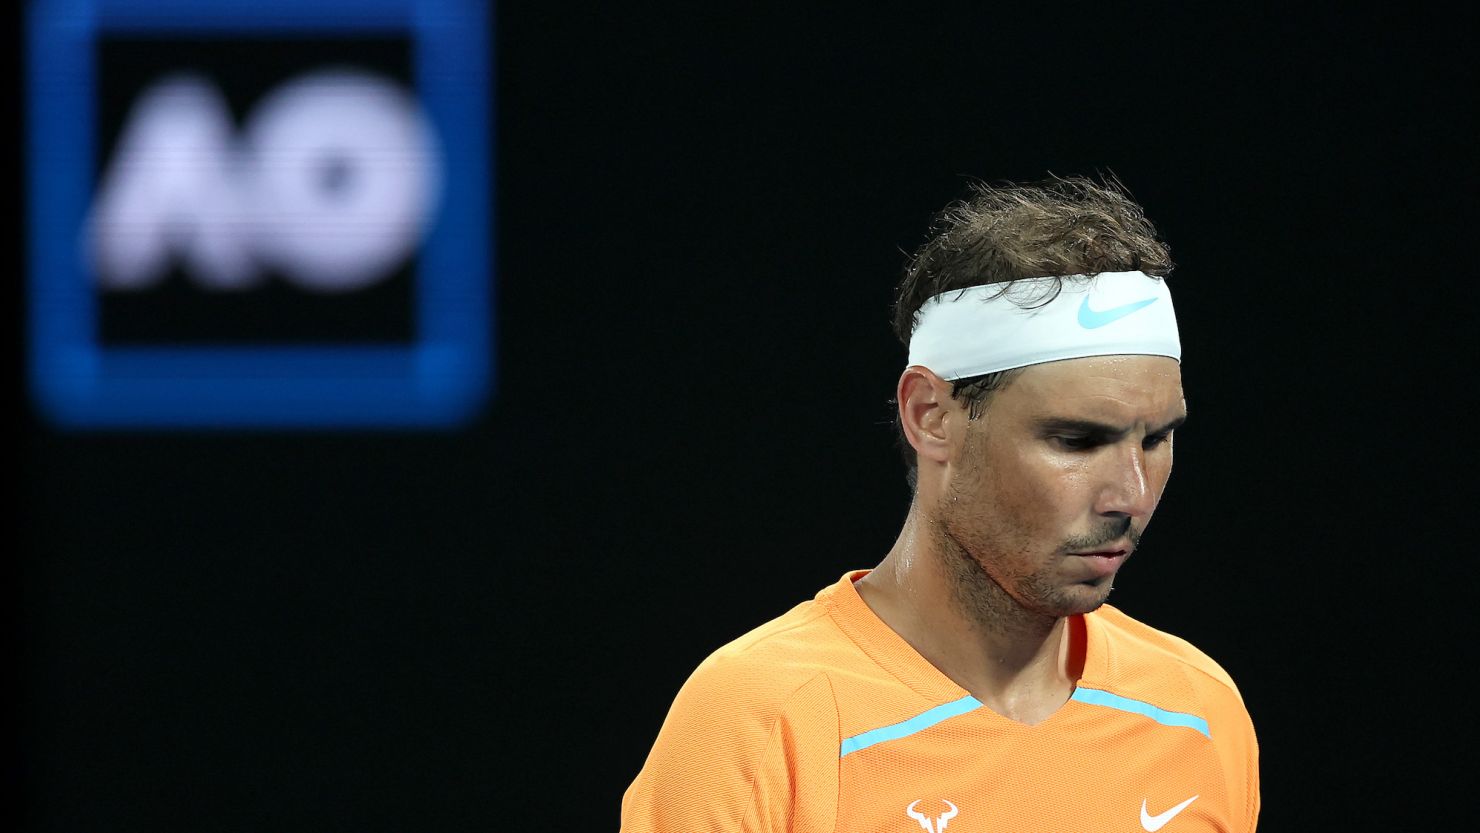 Injured Rafael Nadal Withdraws From The French Open The New